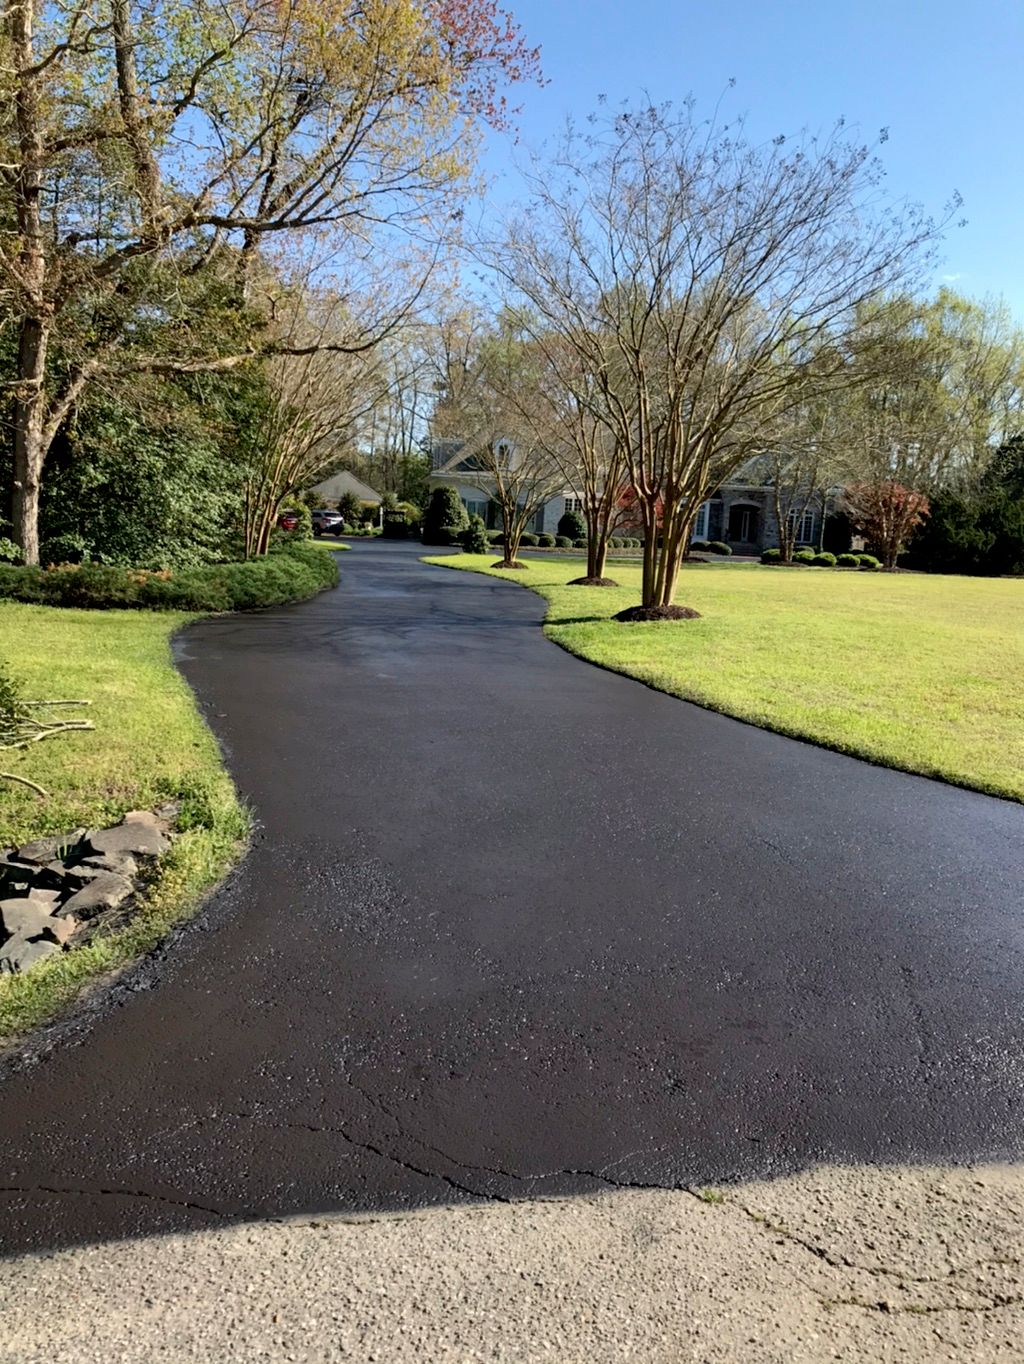 Active paving